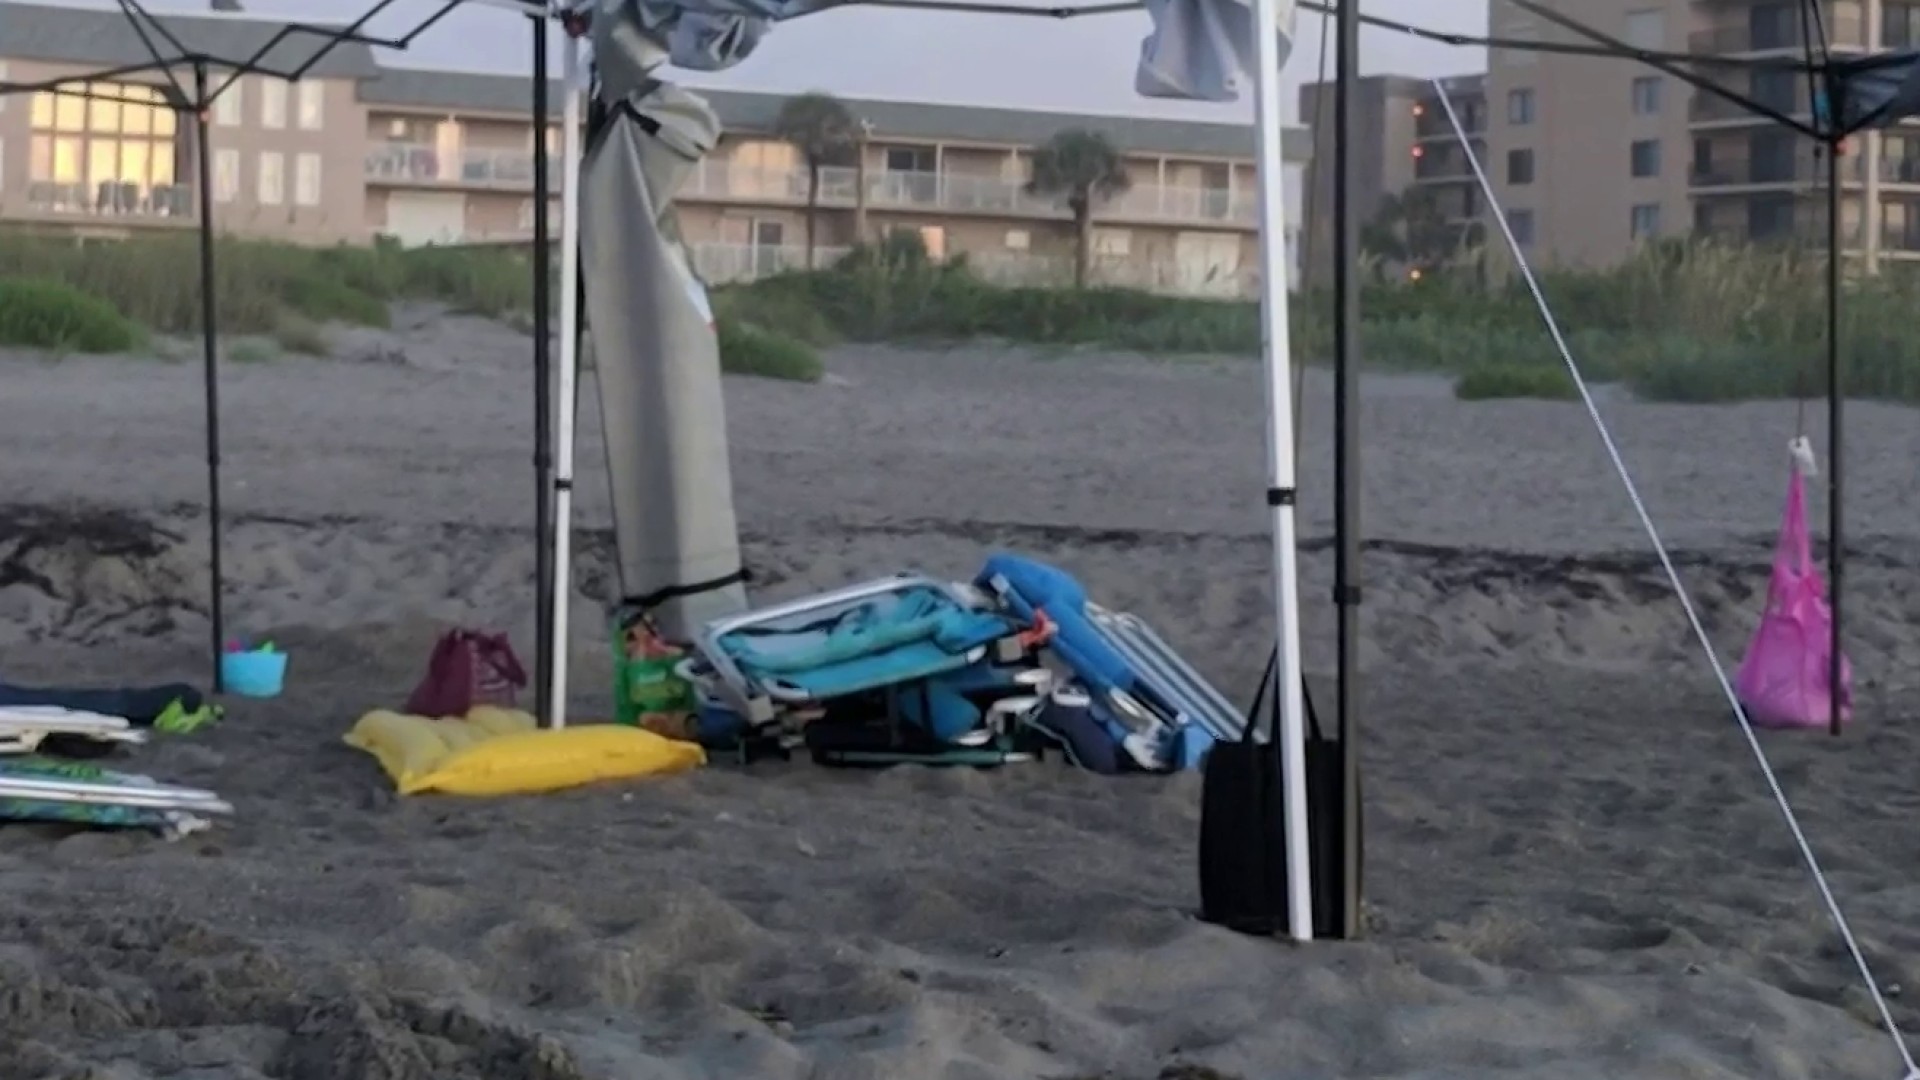 Cocoa Beach ordinance to target discarded items left overnight on